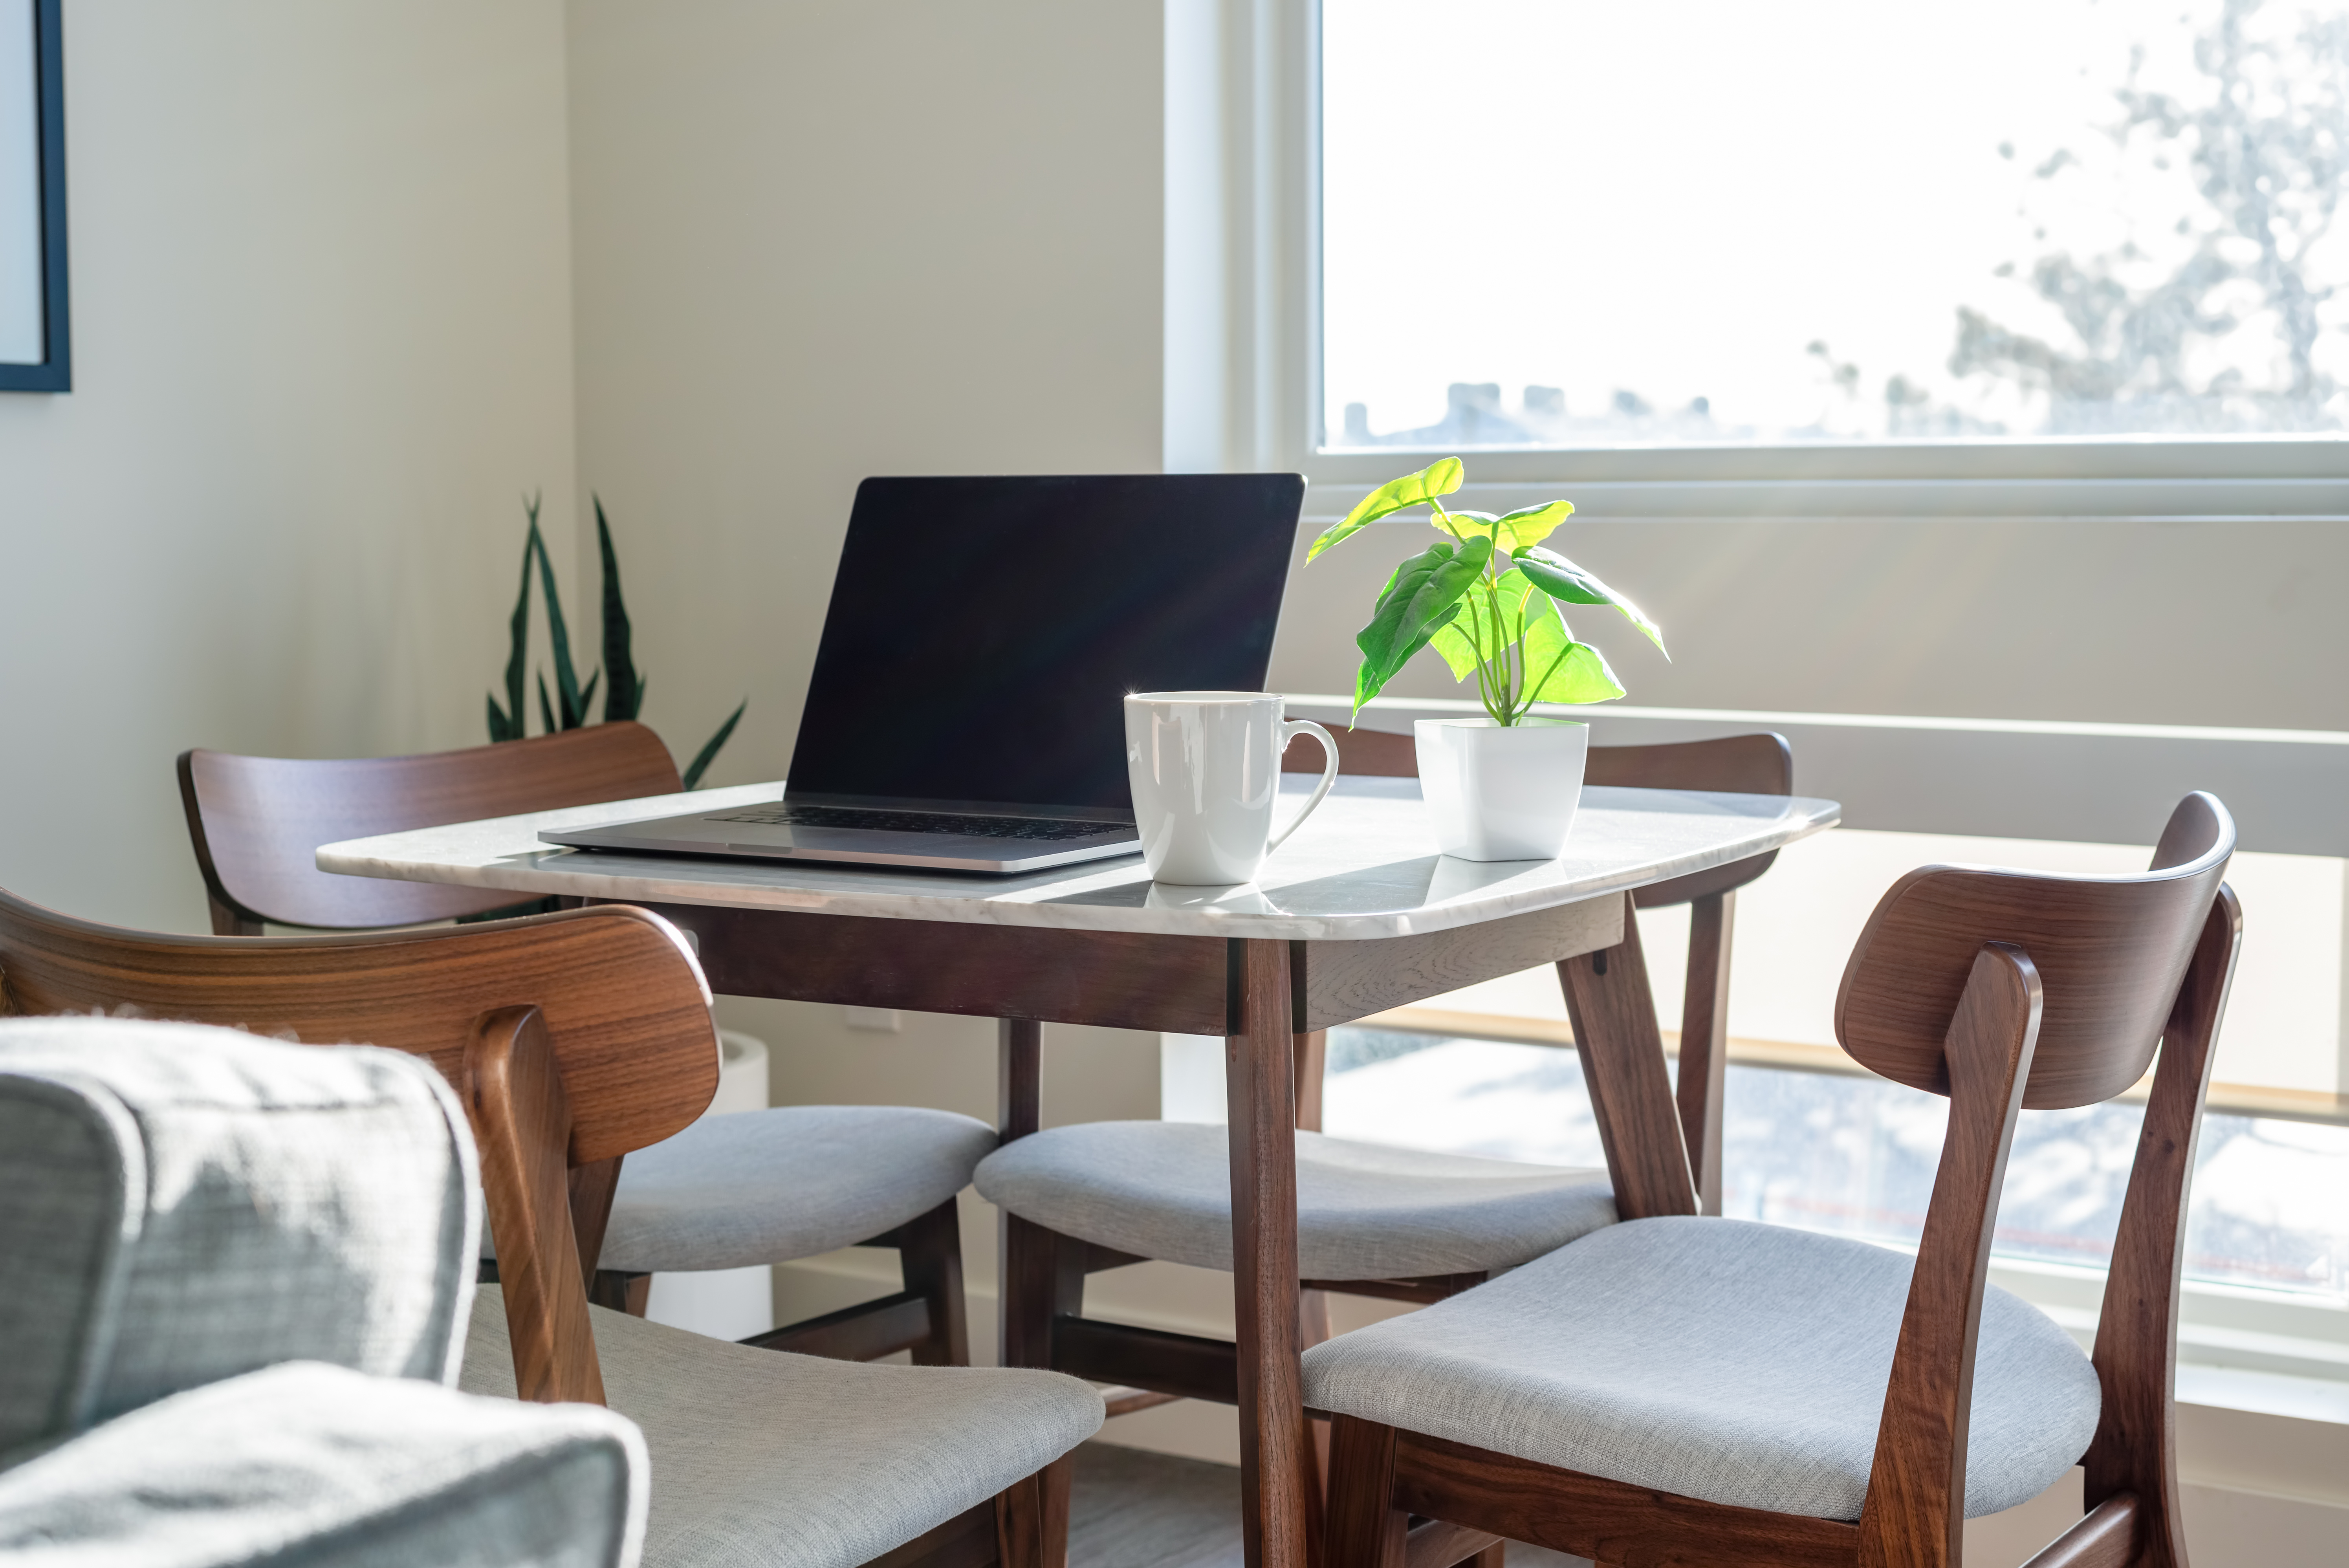 Remote Working is here to stay - for now